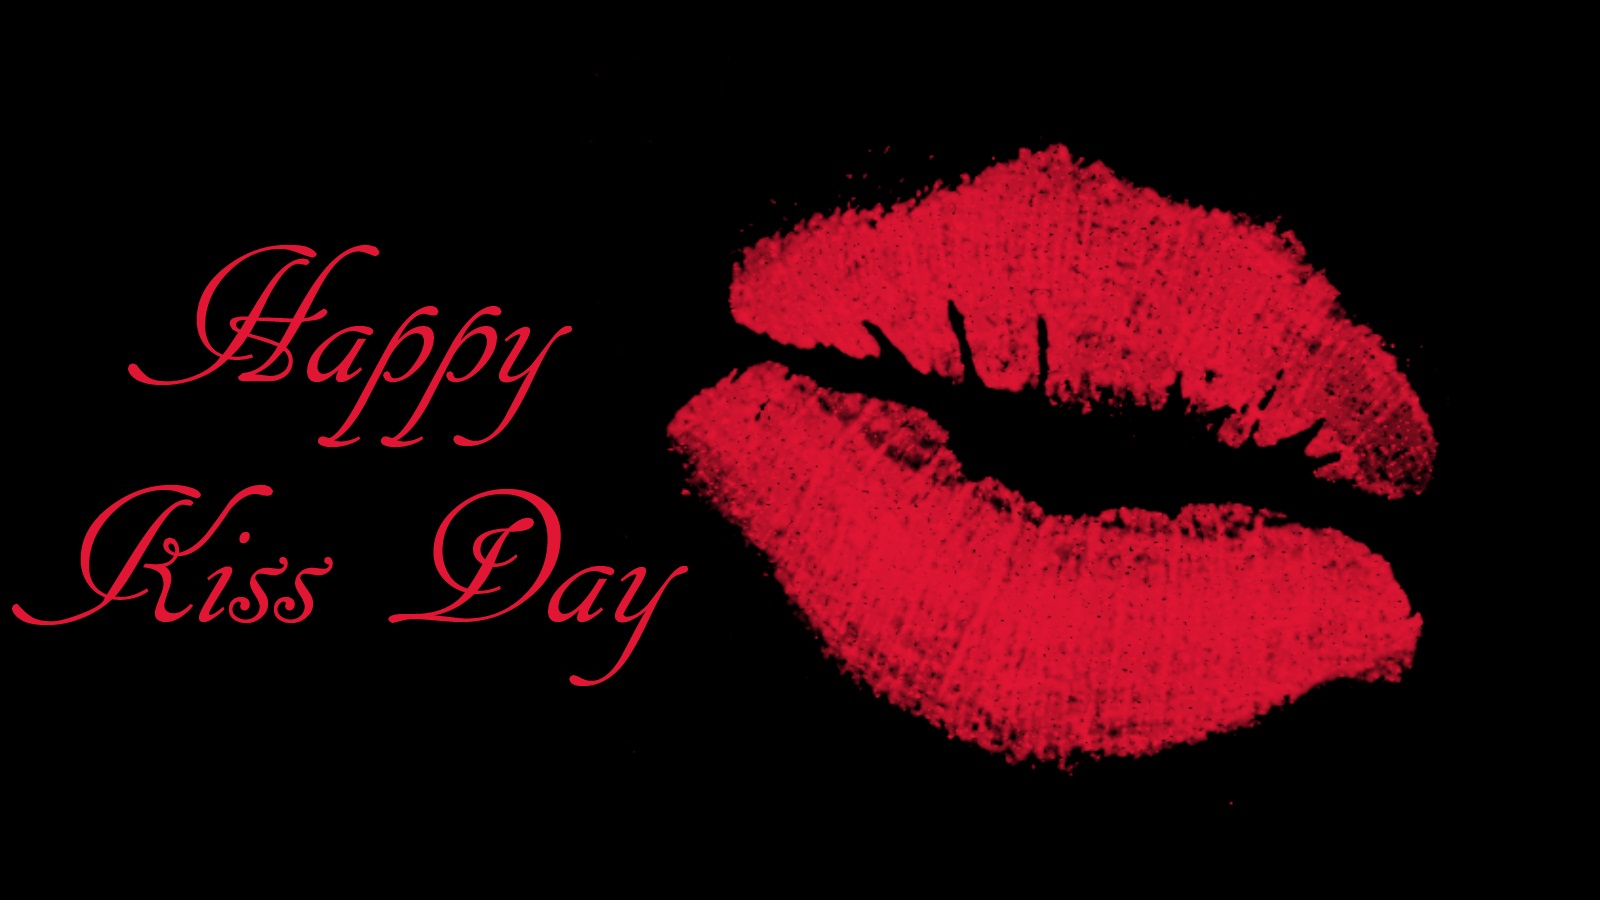 Free download Kiss Day SMS Images Quotes Wallpapers Messages Kiss ...